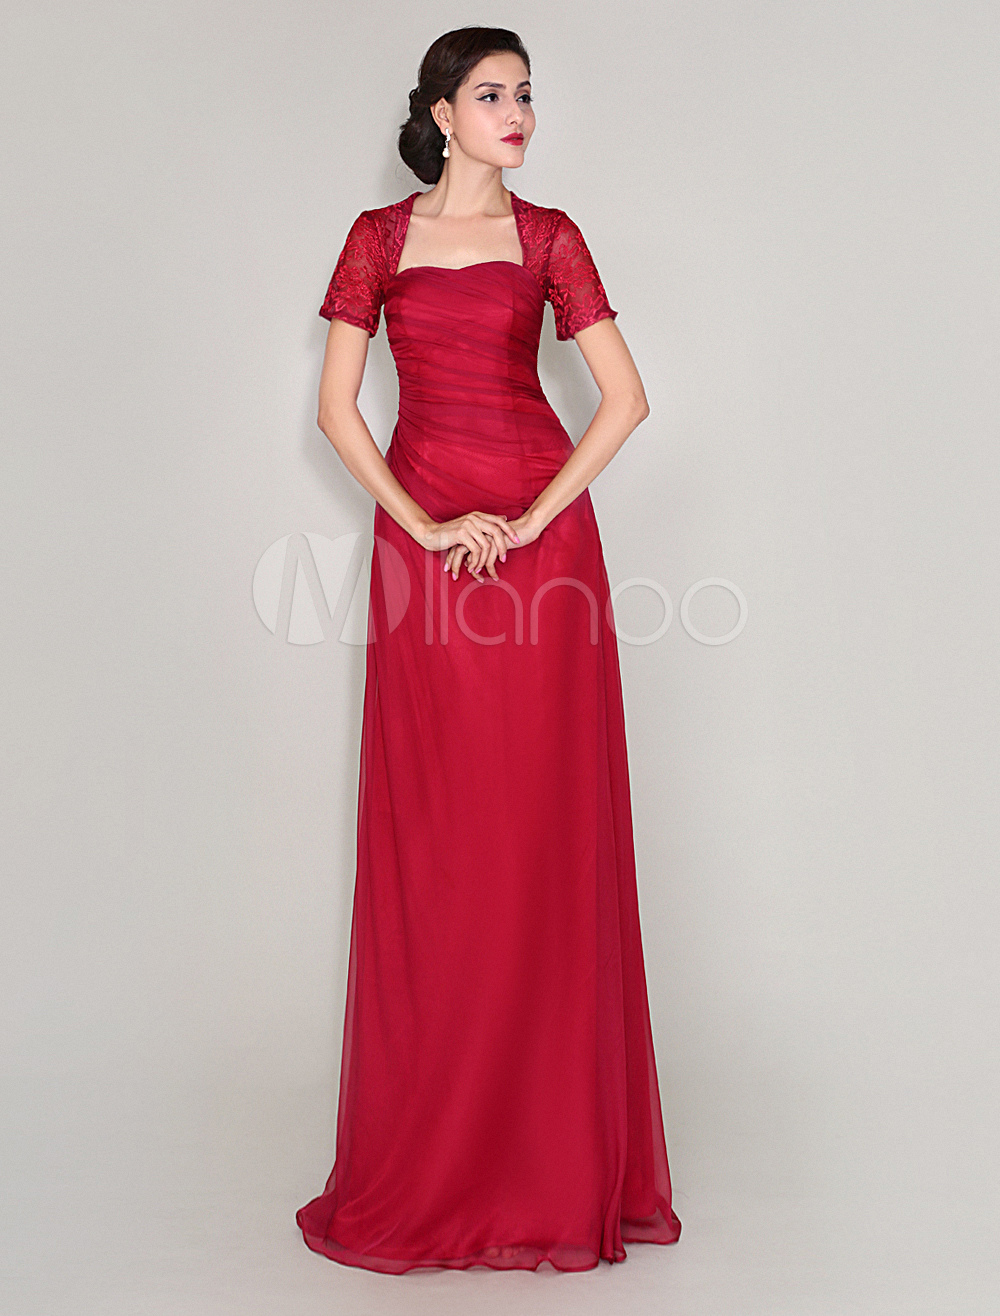 Wine Red Floor-Length Sweetheart Neck Lace Dress For Mother Of Bride (Wedding) photo